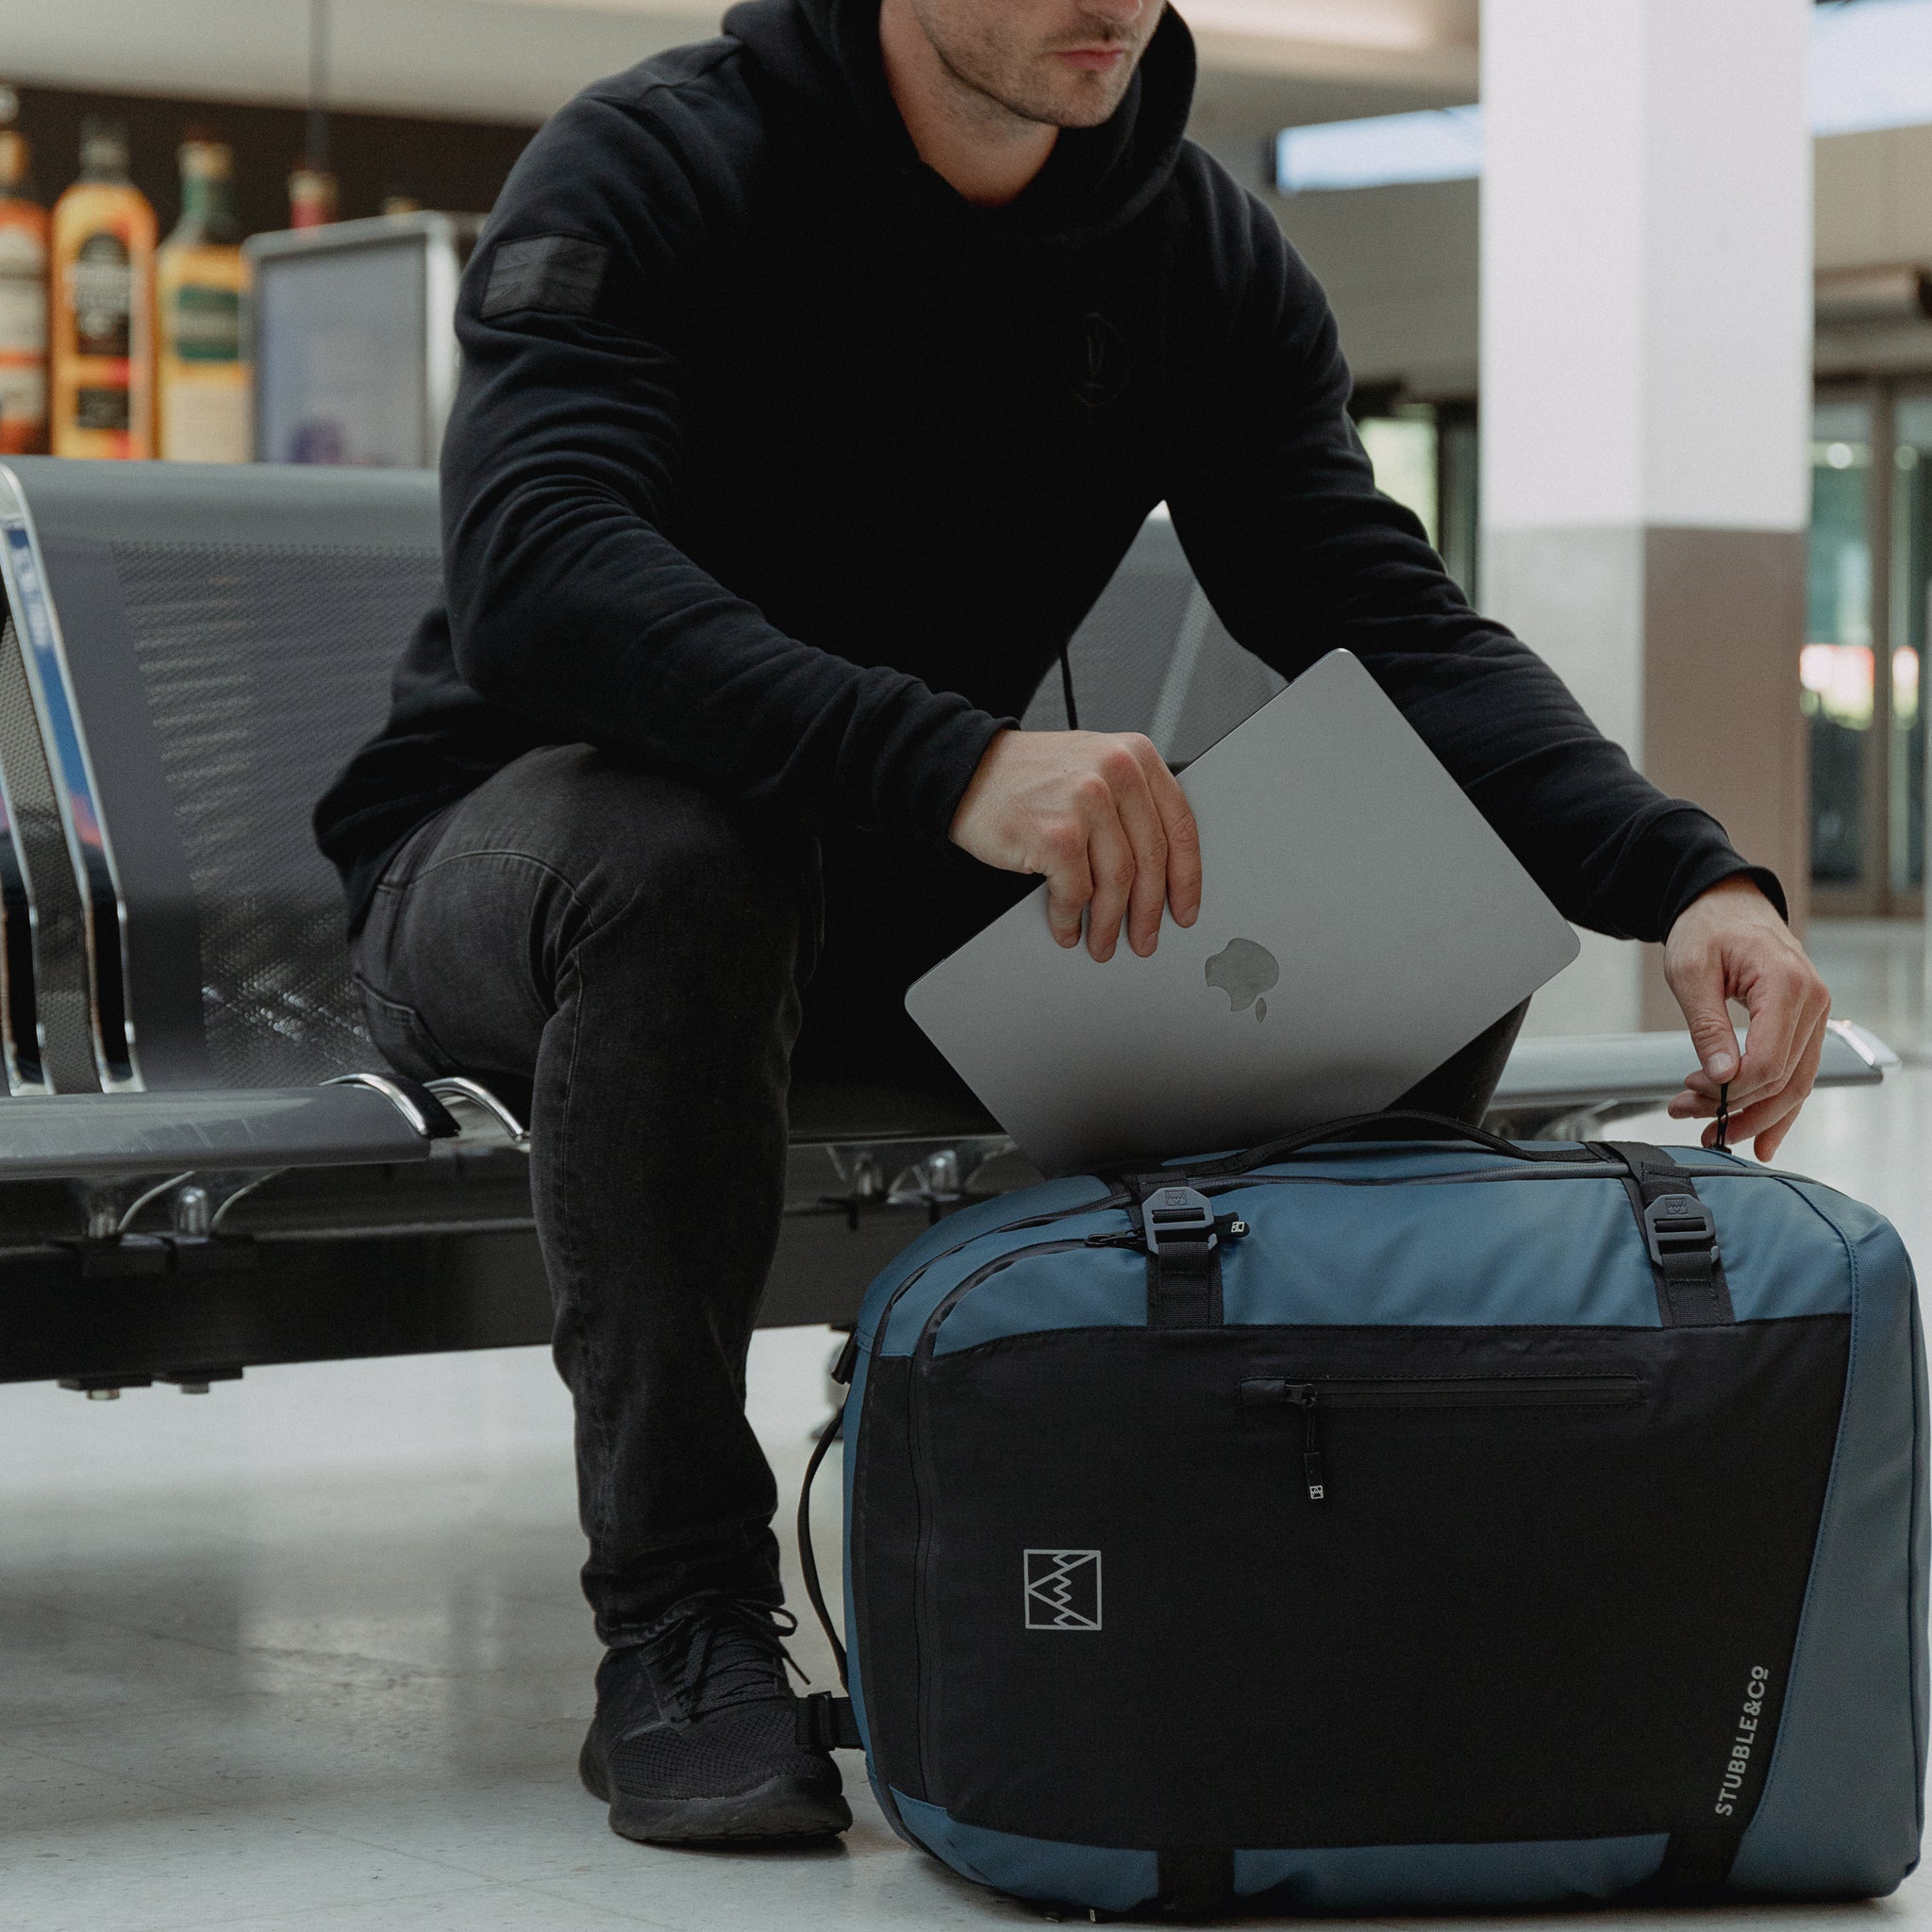 A man sat down with the Adventure Bag in Tasmin Blue on the floor, putting a laptop in the bag.